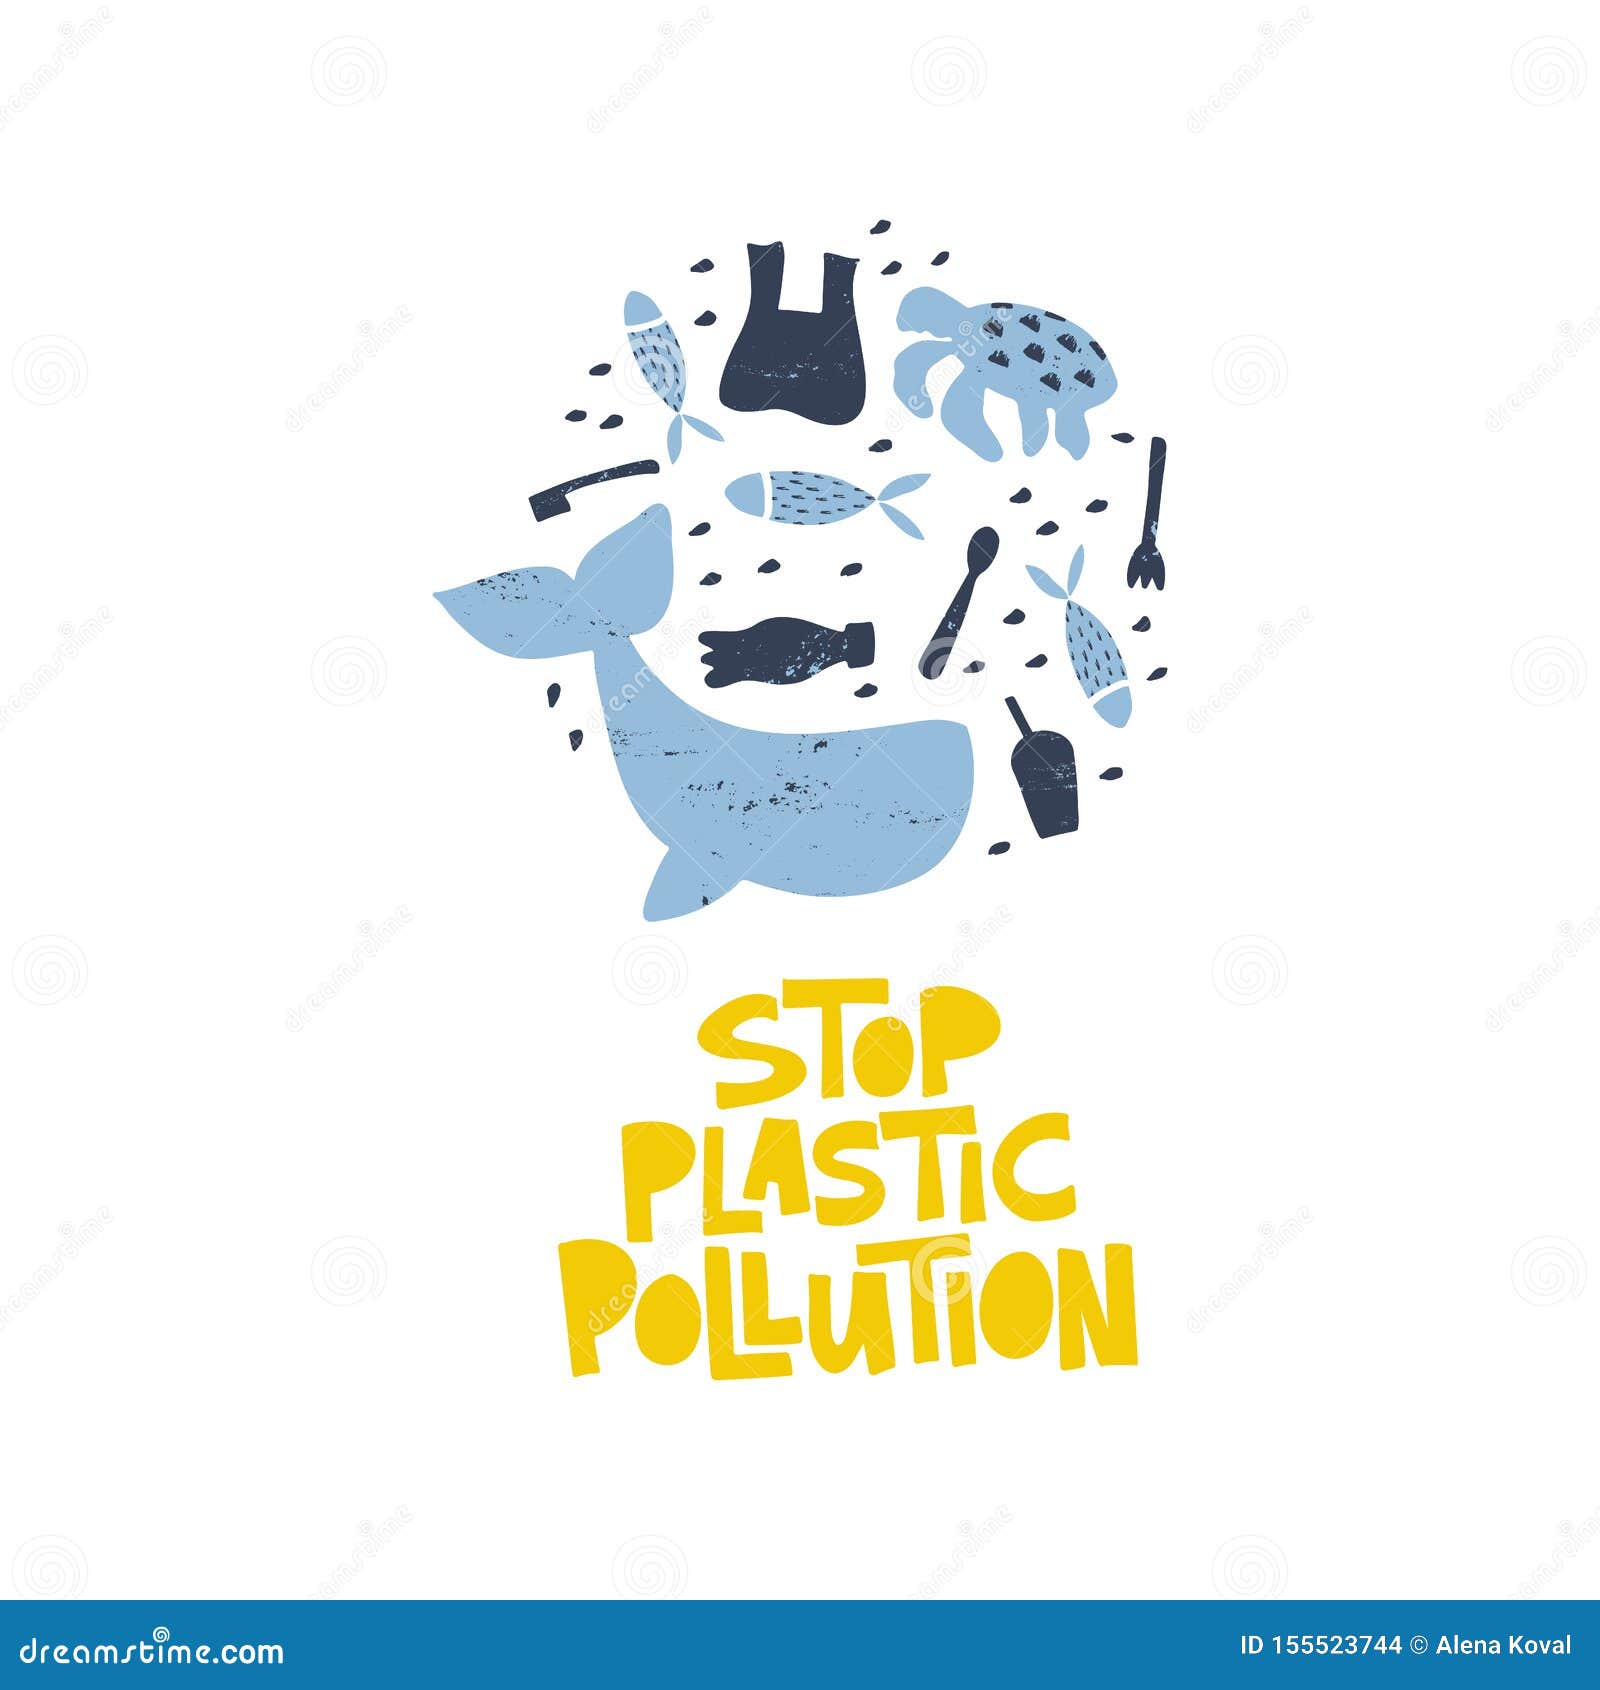 National Pollution Control day drawing / National Pollution Control day  poster / Stop Pollution draw | Drawings, Poster, Pollution